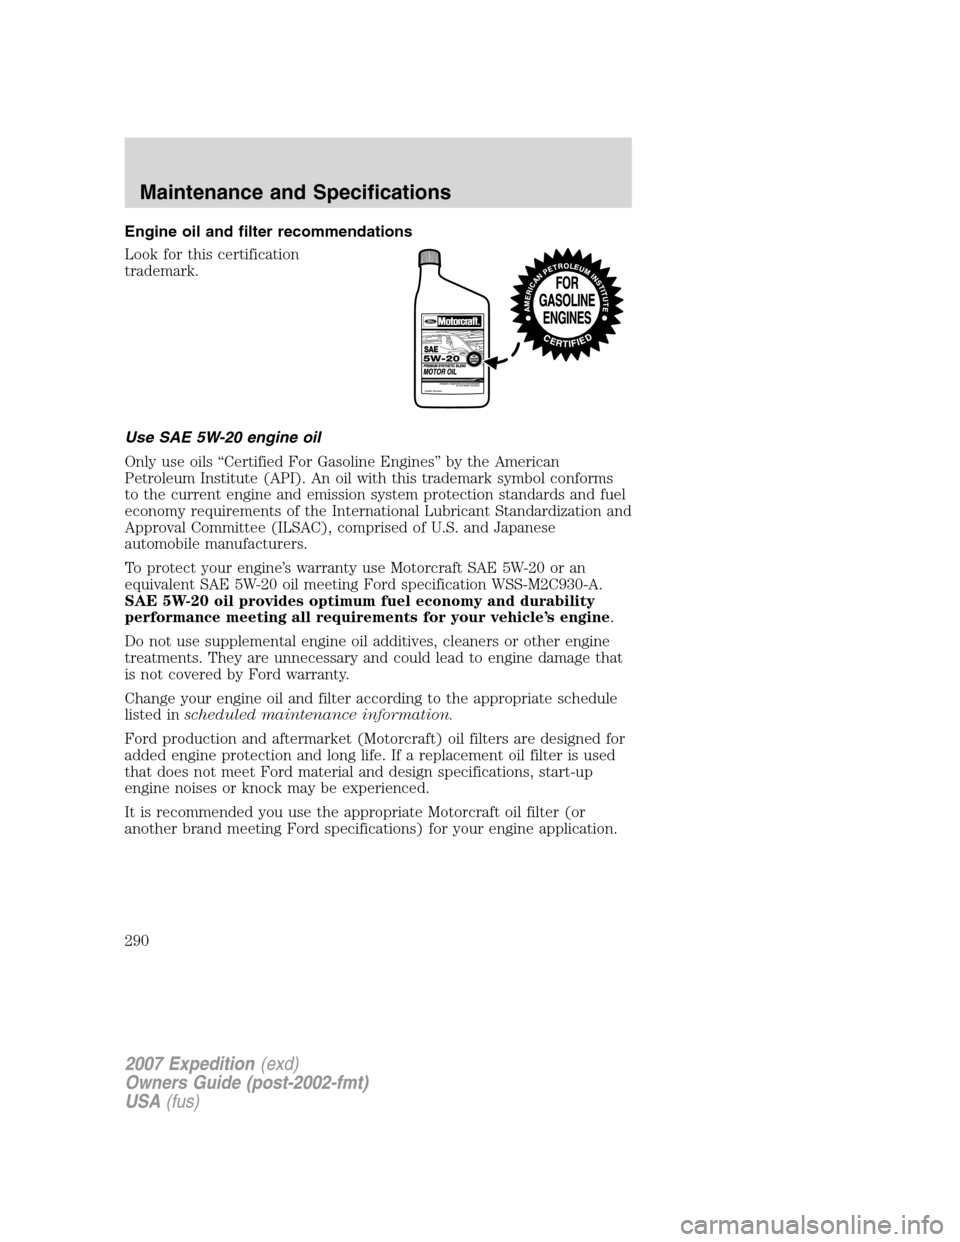 FORD EXPEDITION 2007 3.G Owners Manual Engine oil and filter recommendations
Look for this certification
trademark.
Use SAE 5W-20 engine oil
Only use oils “Certified For Gasoline Engines” by the American
Petroleum Institute (API). An o